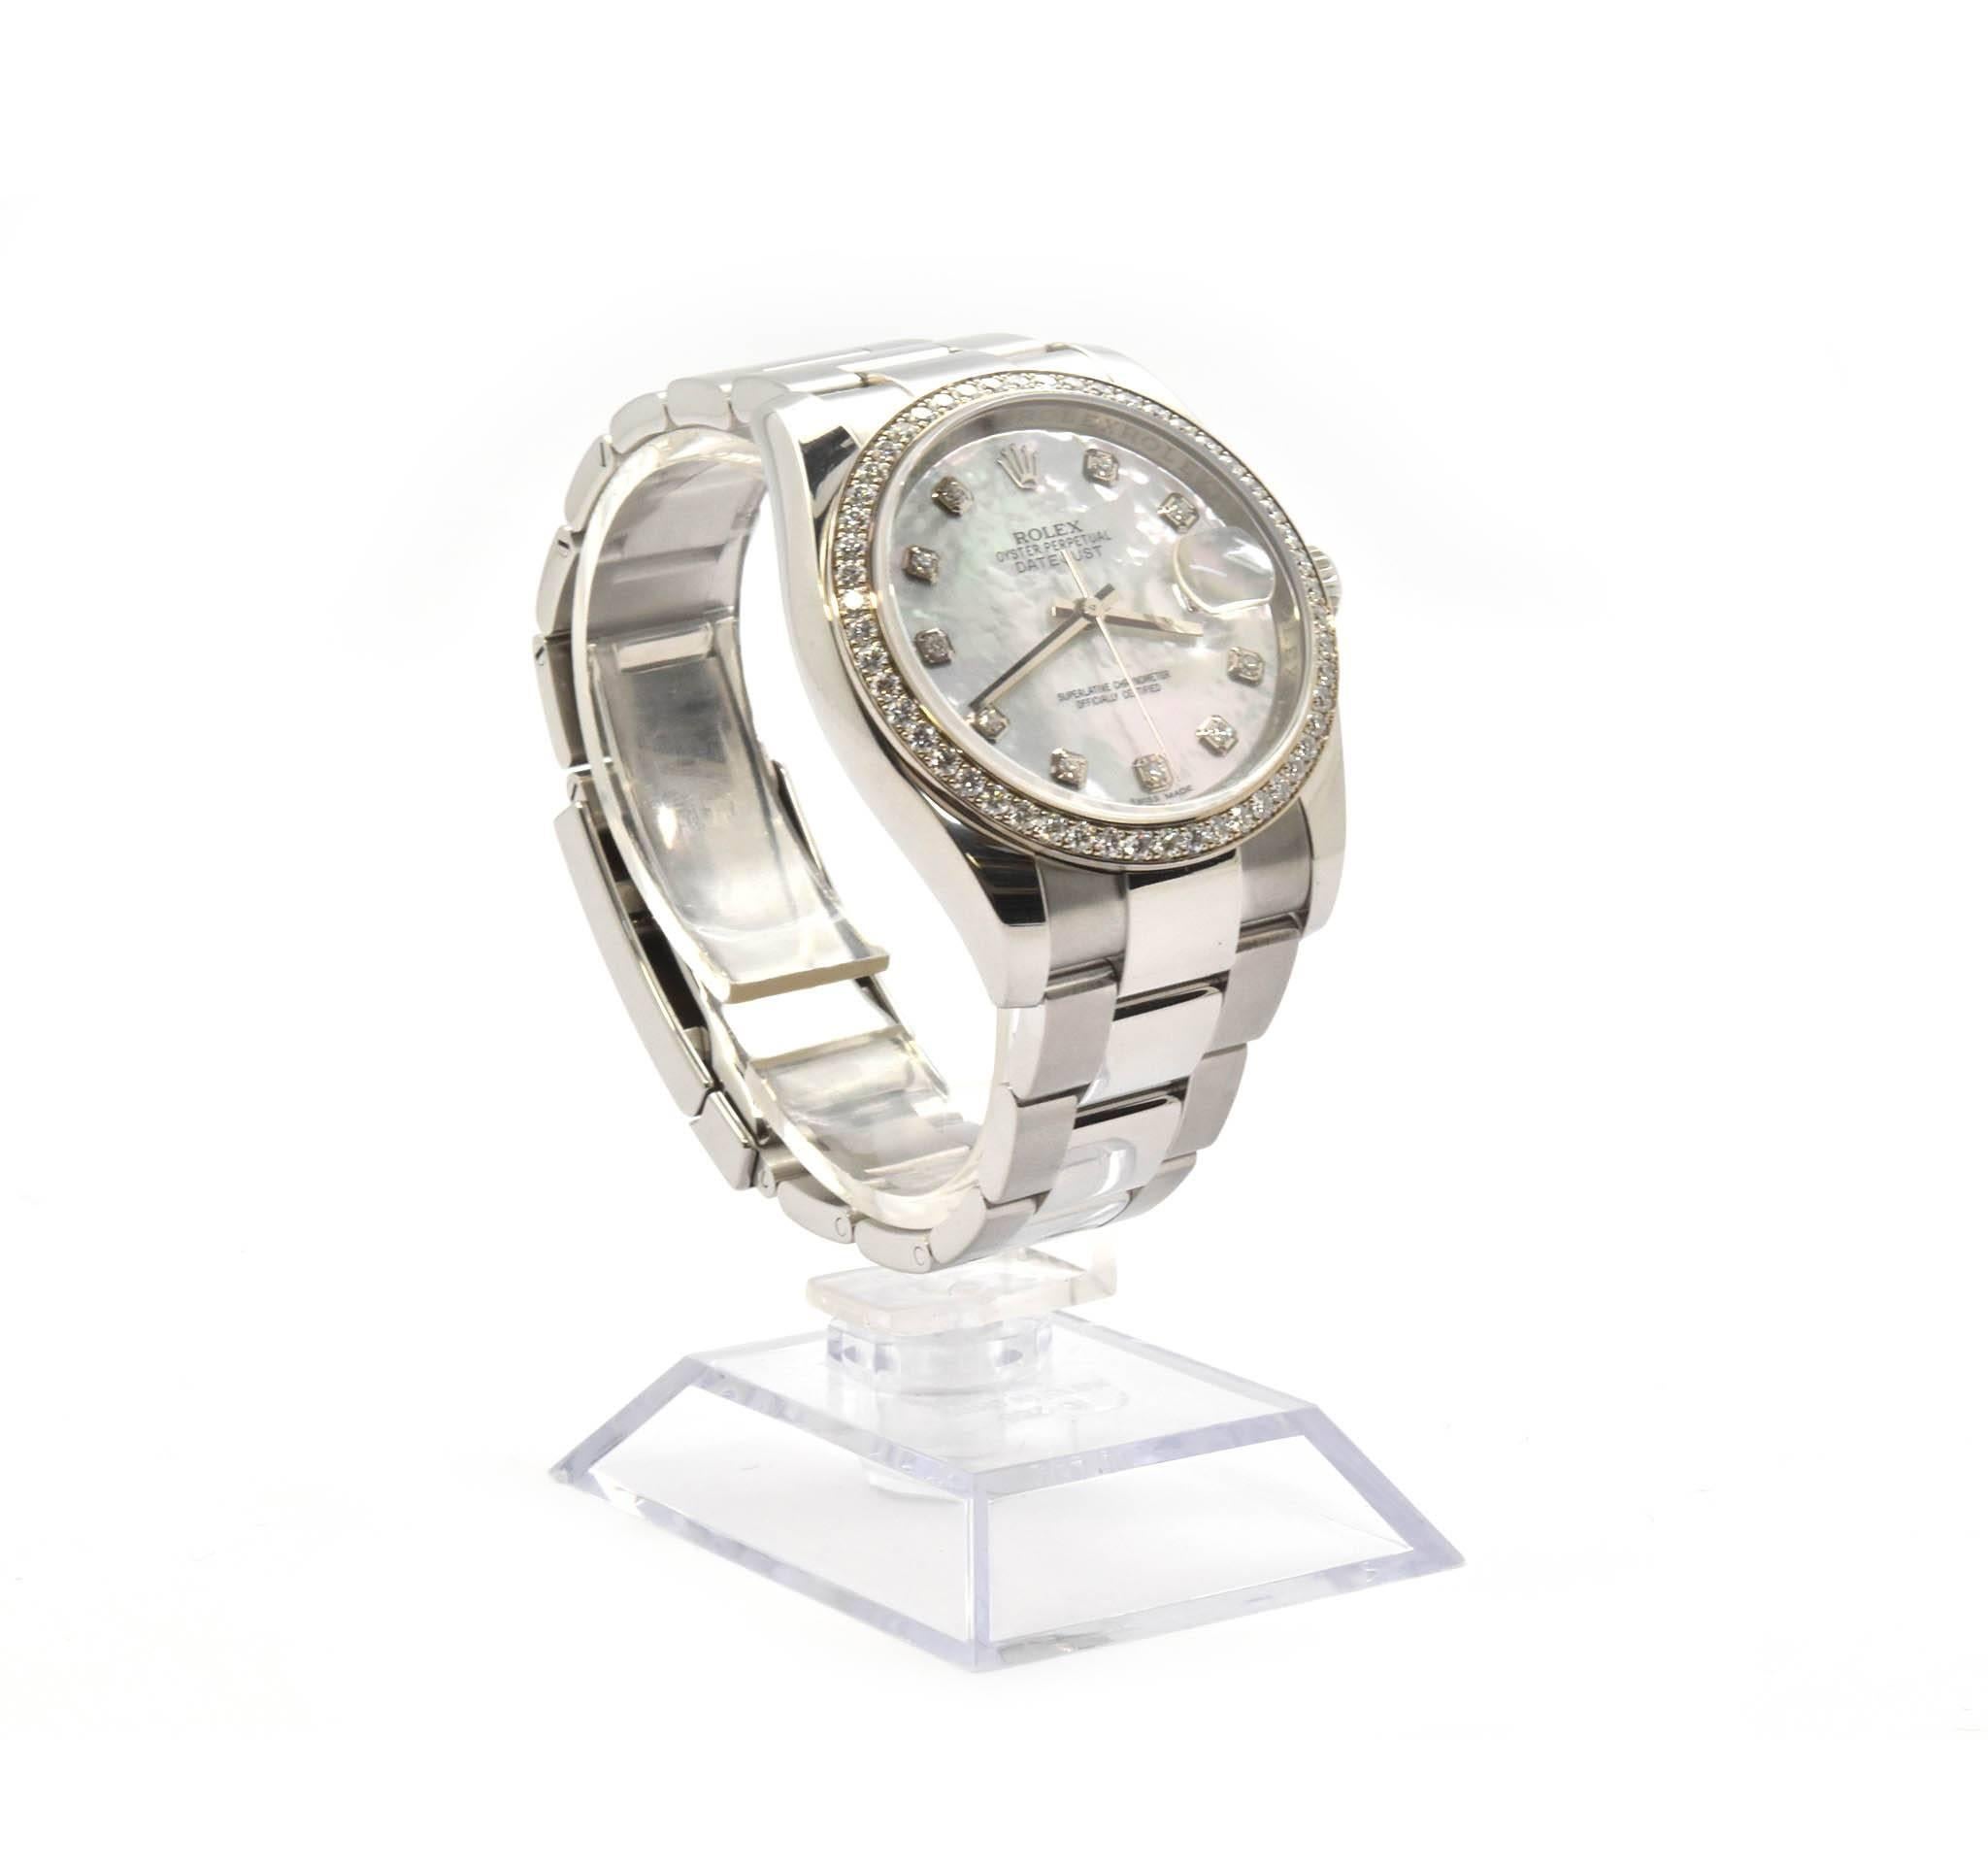 Movement: 3135 caliber automatic movement
Function: hours, minutes, seconds, date
Case: 36mm stainless steel case with factory diamond bezel in 18k white gold setting, screw-down crown, scratch resistant sapphire crystal, waterproof to 100